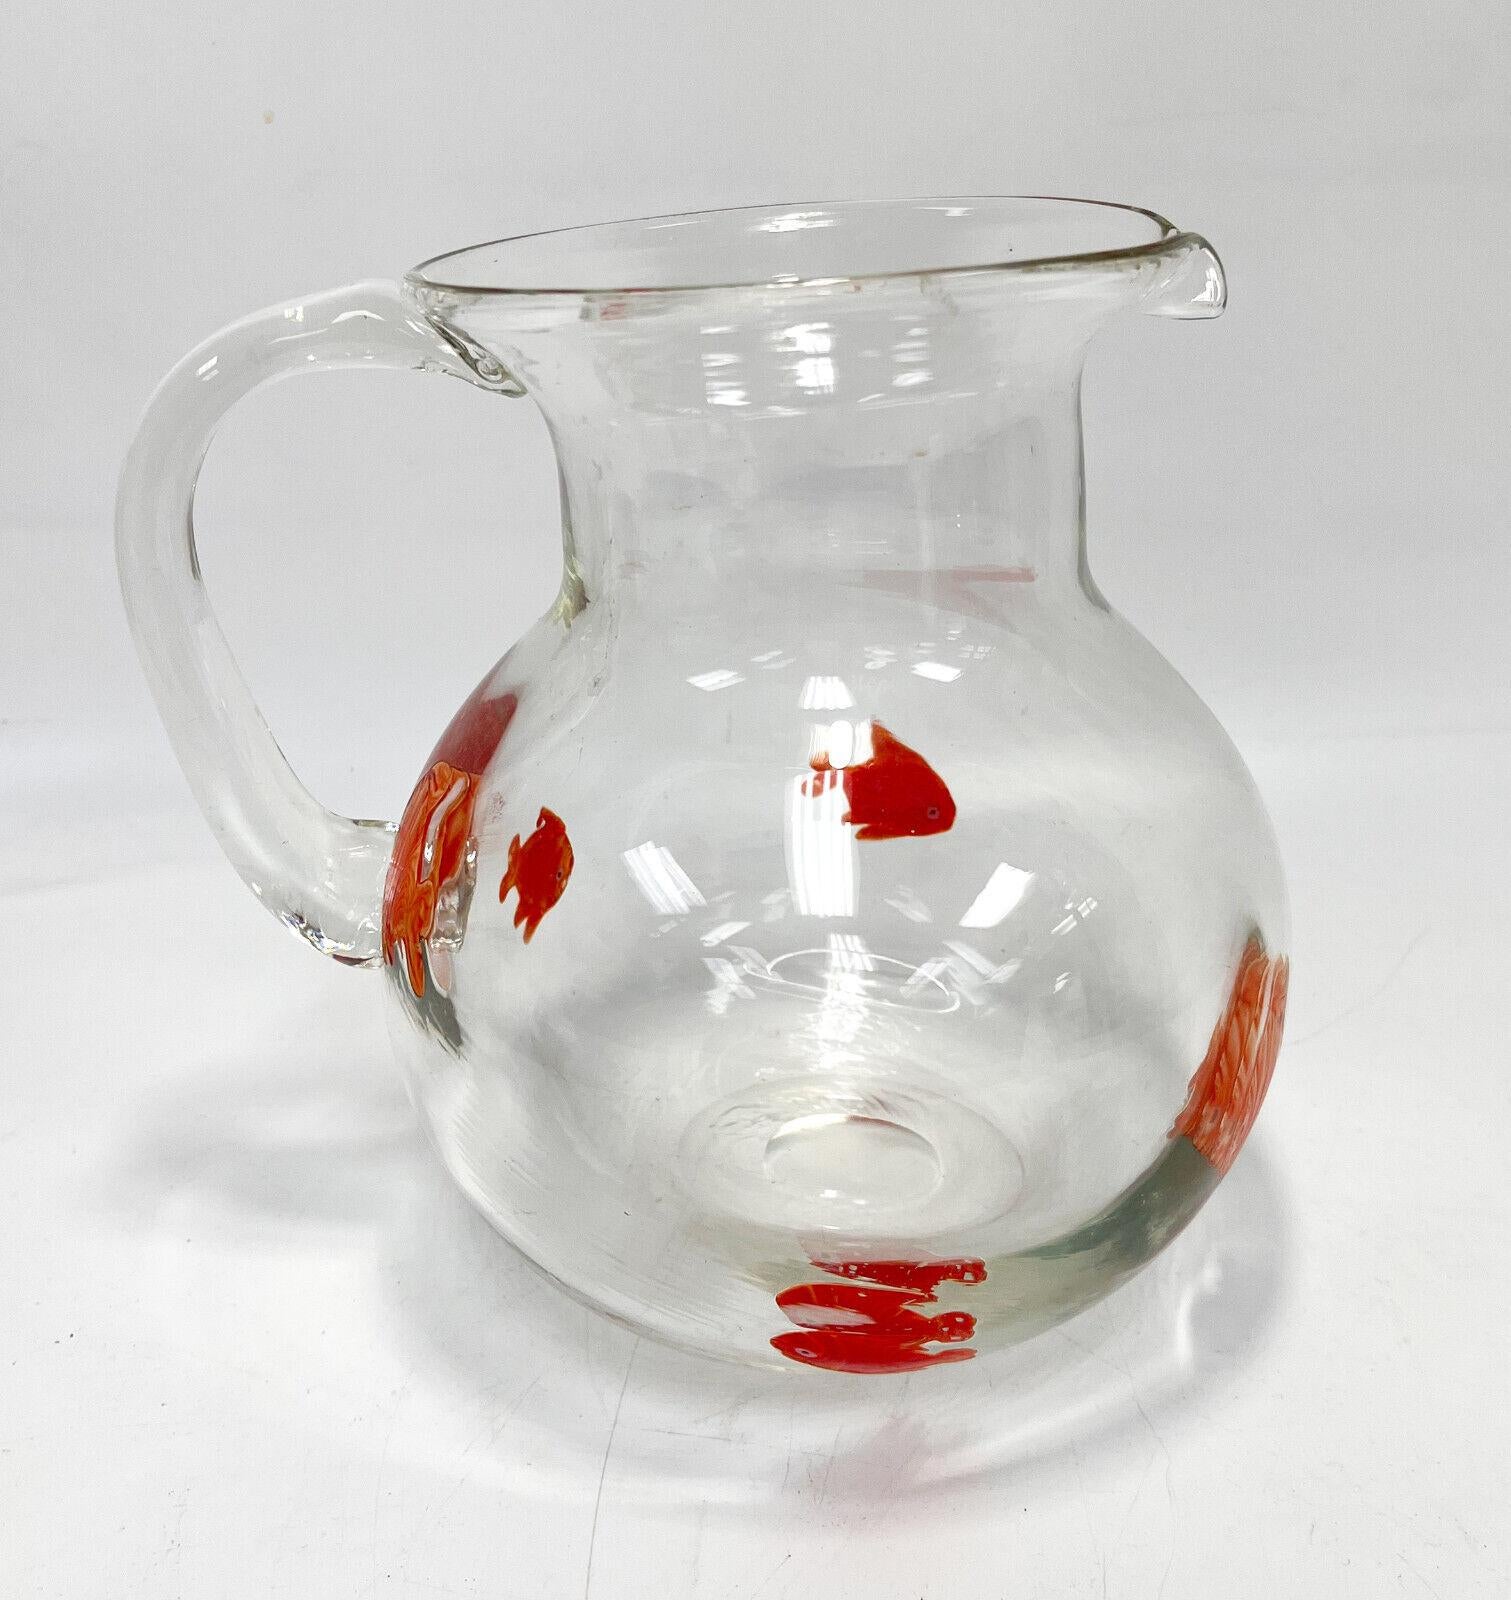 Murano Art Glass Cased Sunfish Water Pitcher, Polished Pontil In Fair Condition For Sale In Gardena, CA